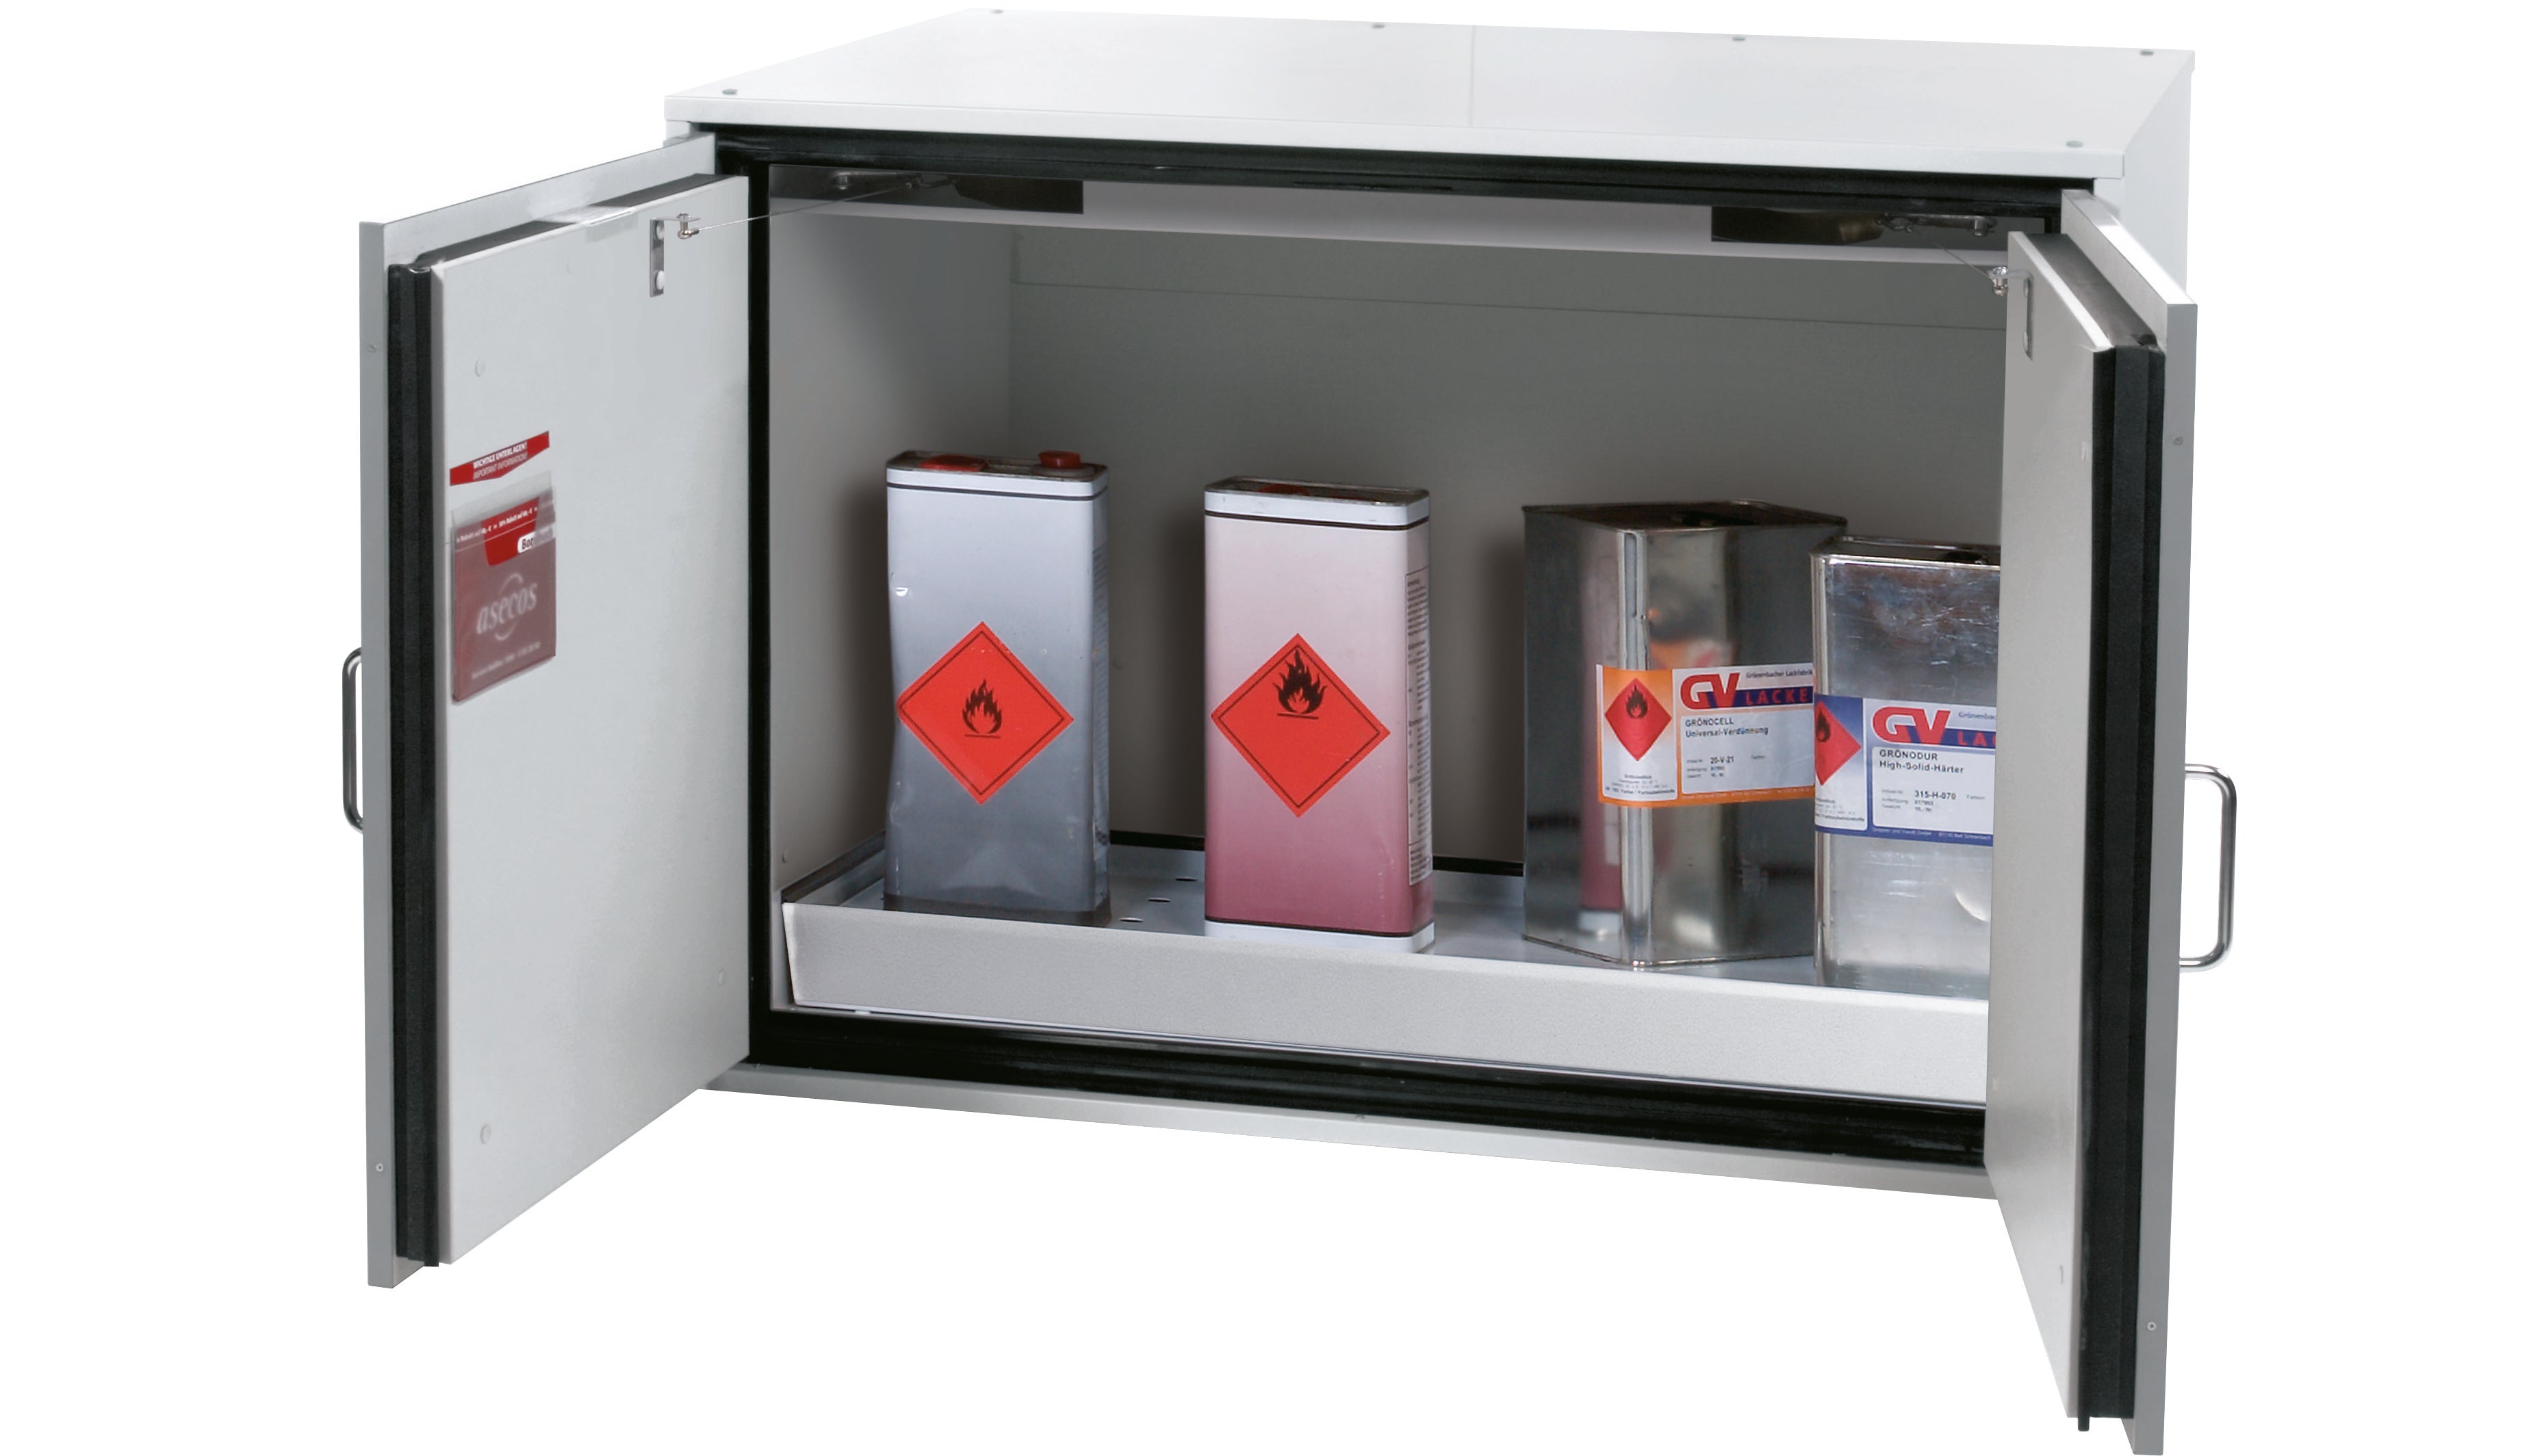 Type 90 safety storage under bench cabinet UB-T-90 model UB90.080.110.075.2T in light grey RAL 7035 with 1x perforated insert standard (stainless steel 1.4301),